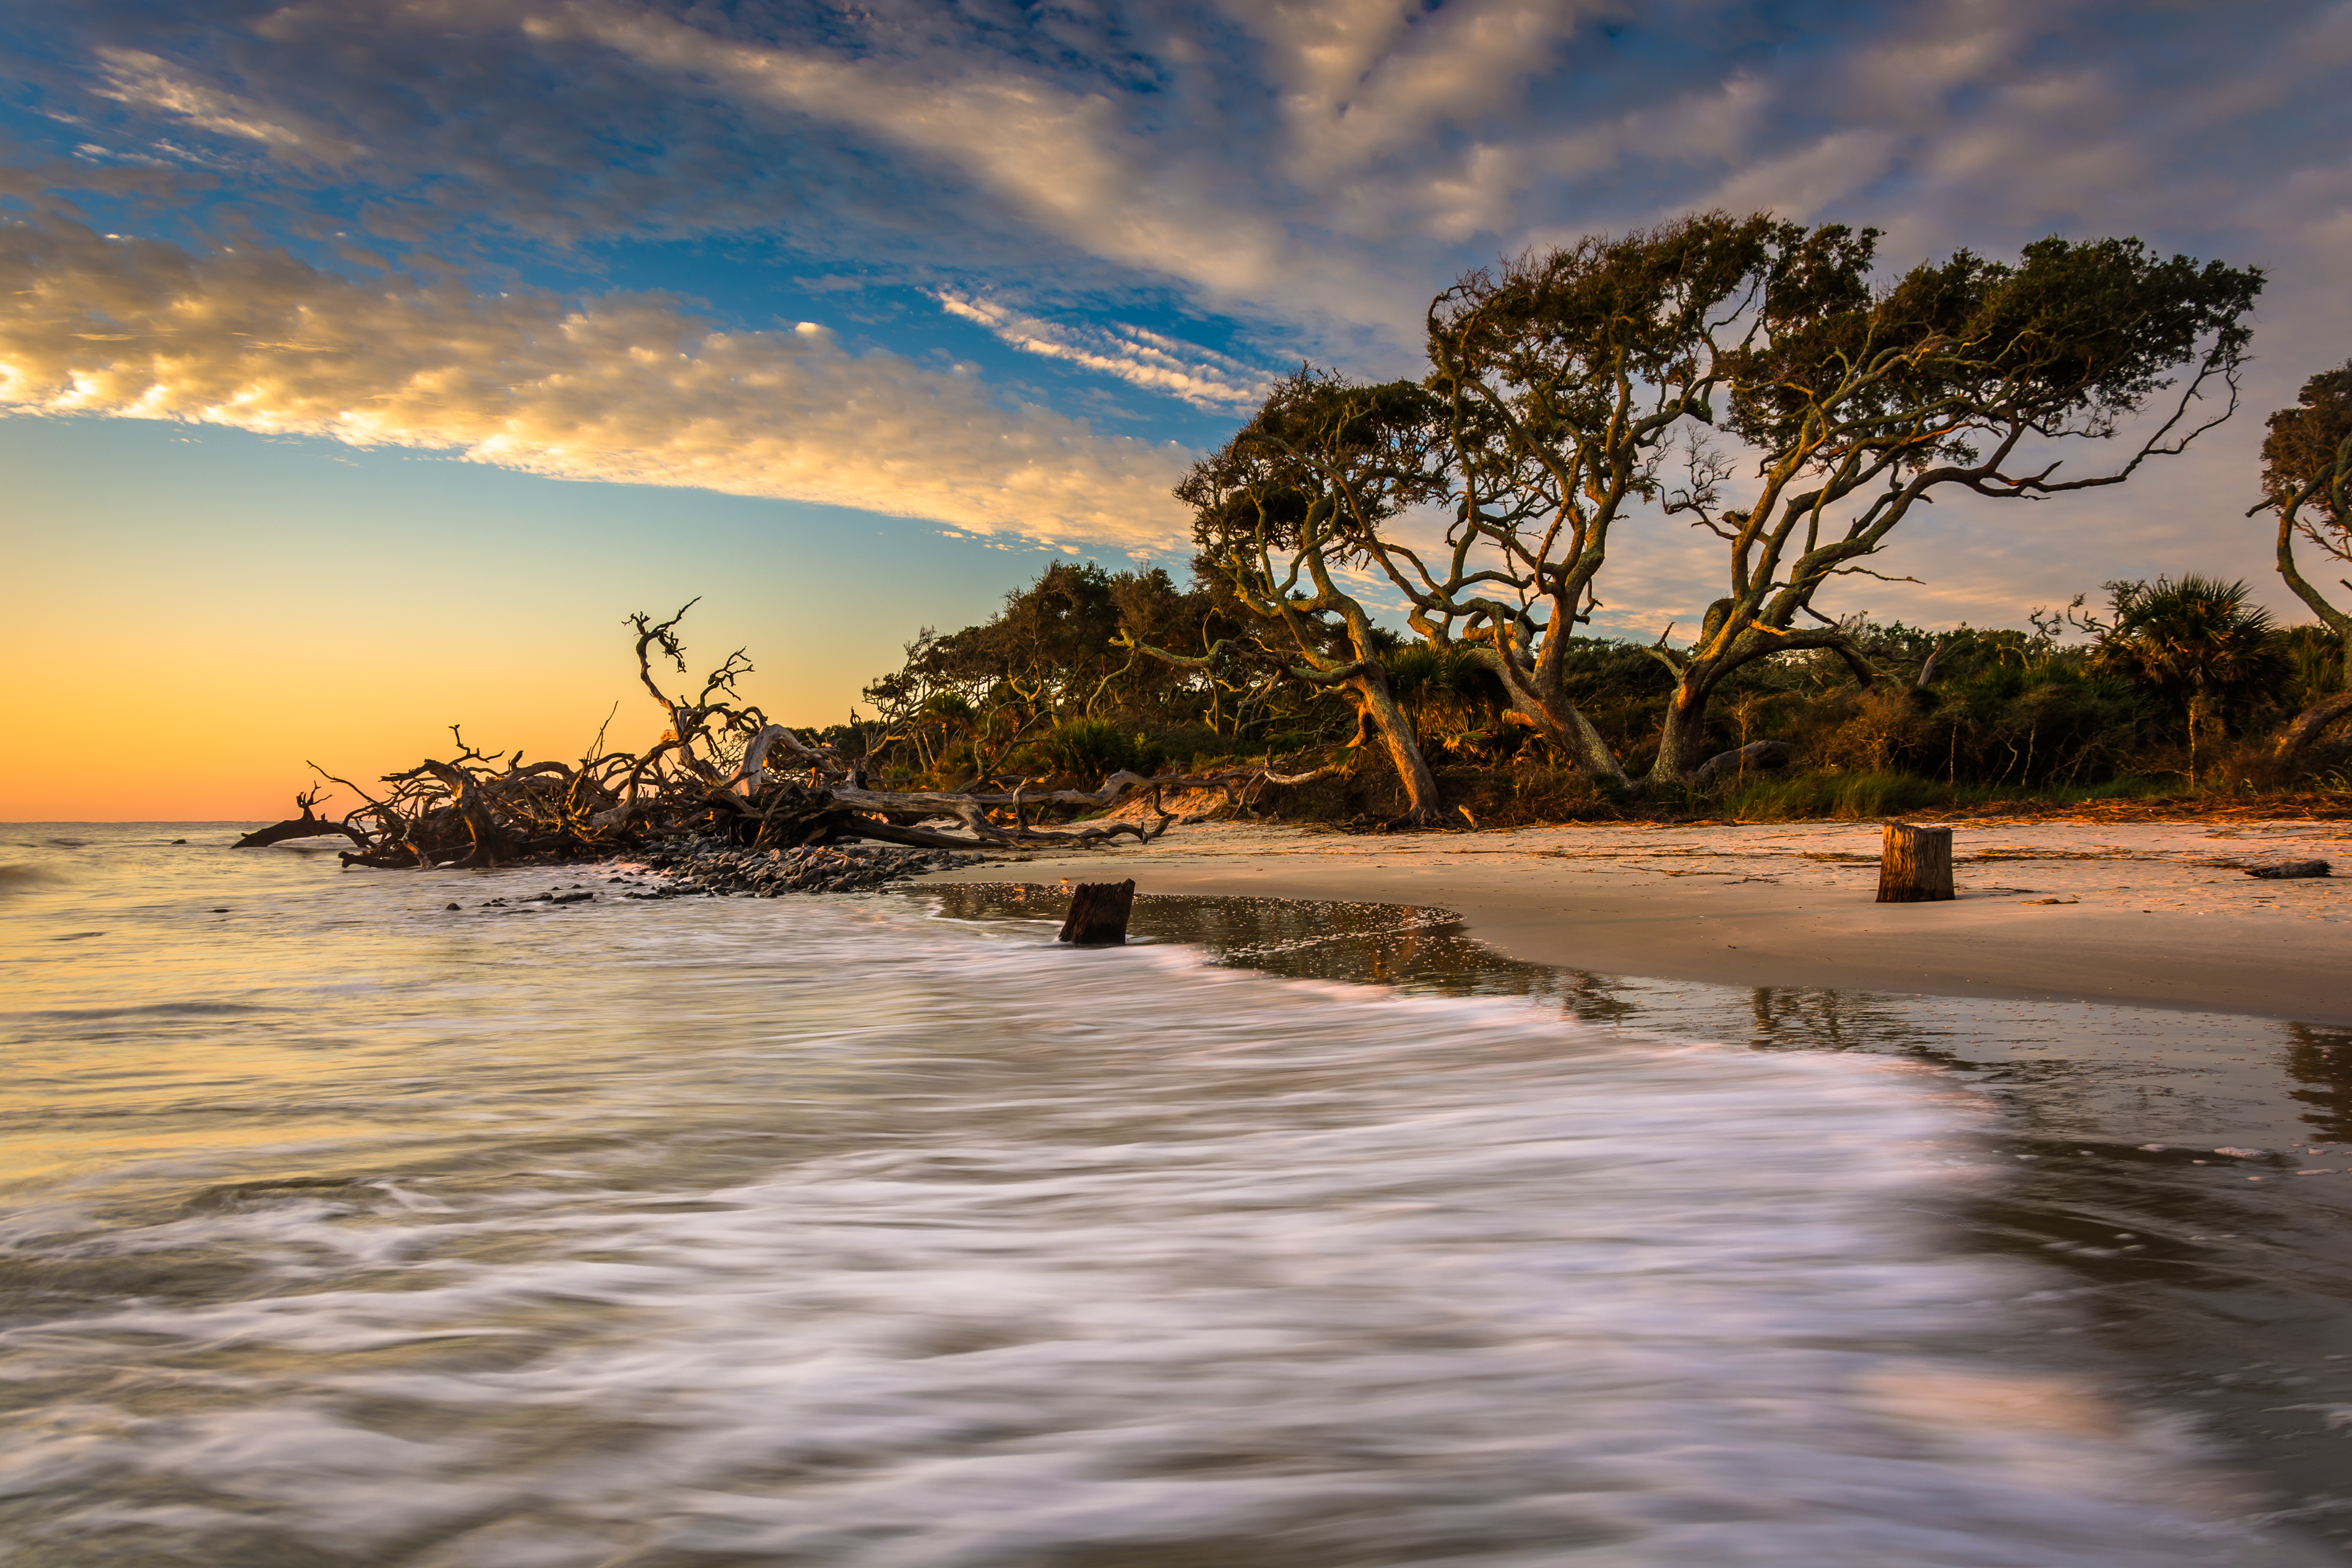 Check Out Amazing Underrated Spring Destinations for a Family Vacation - Driftwood Beach on Jekyll Island